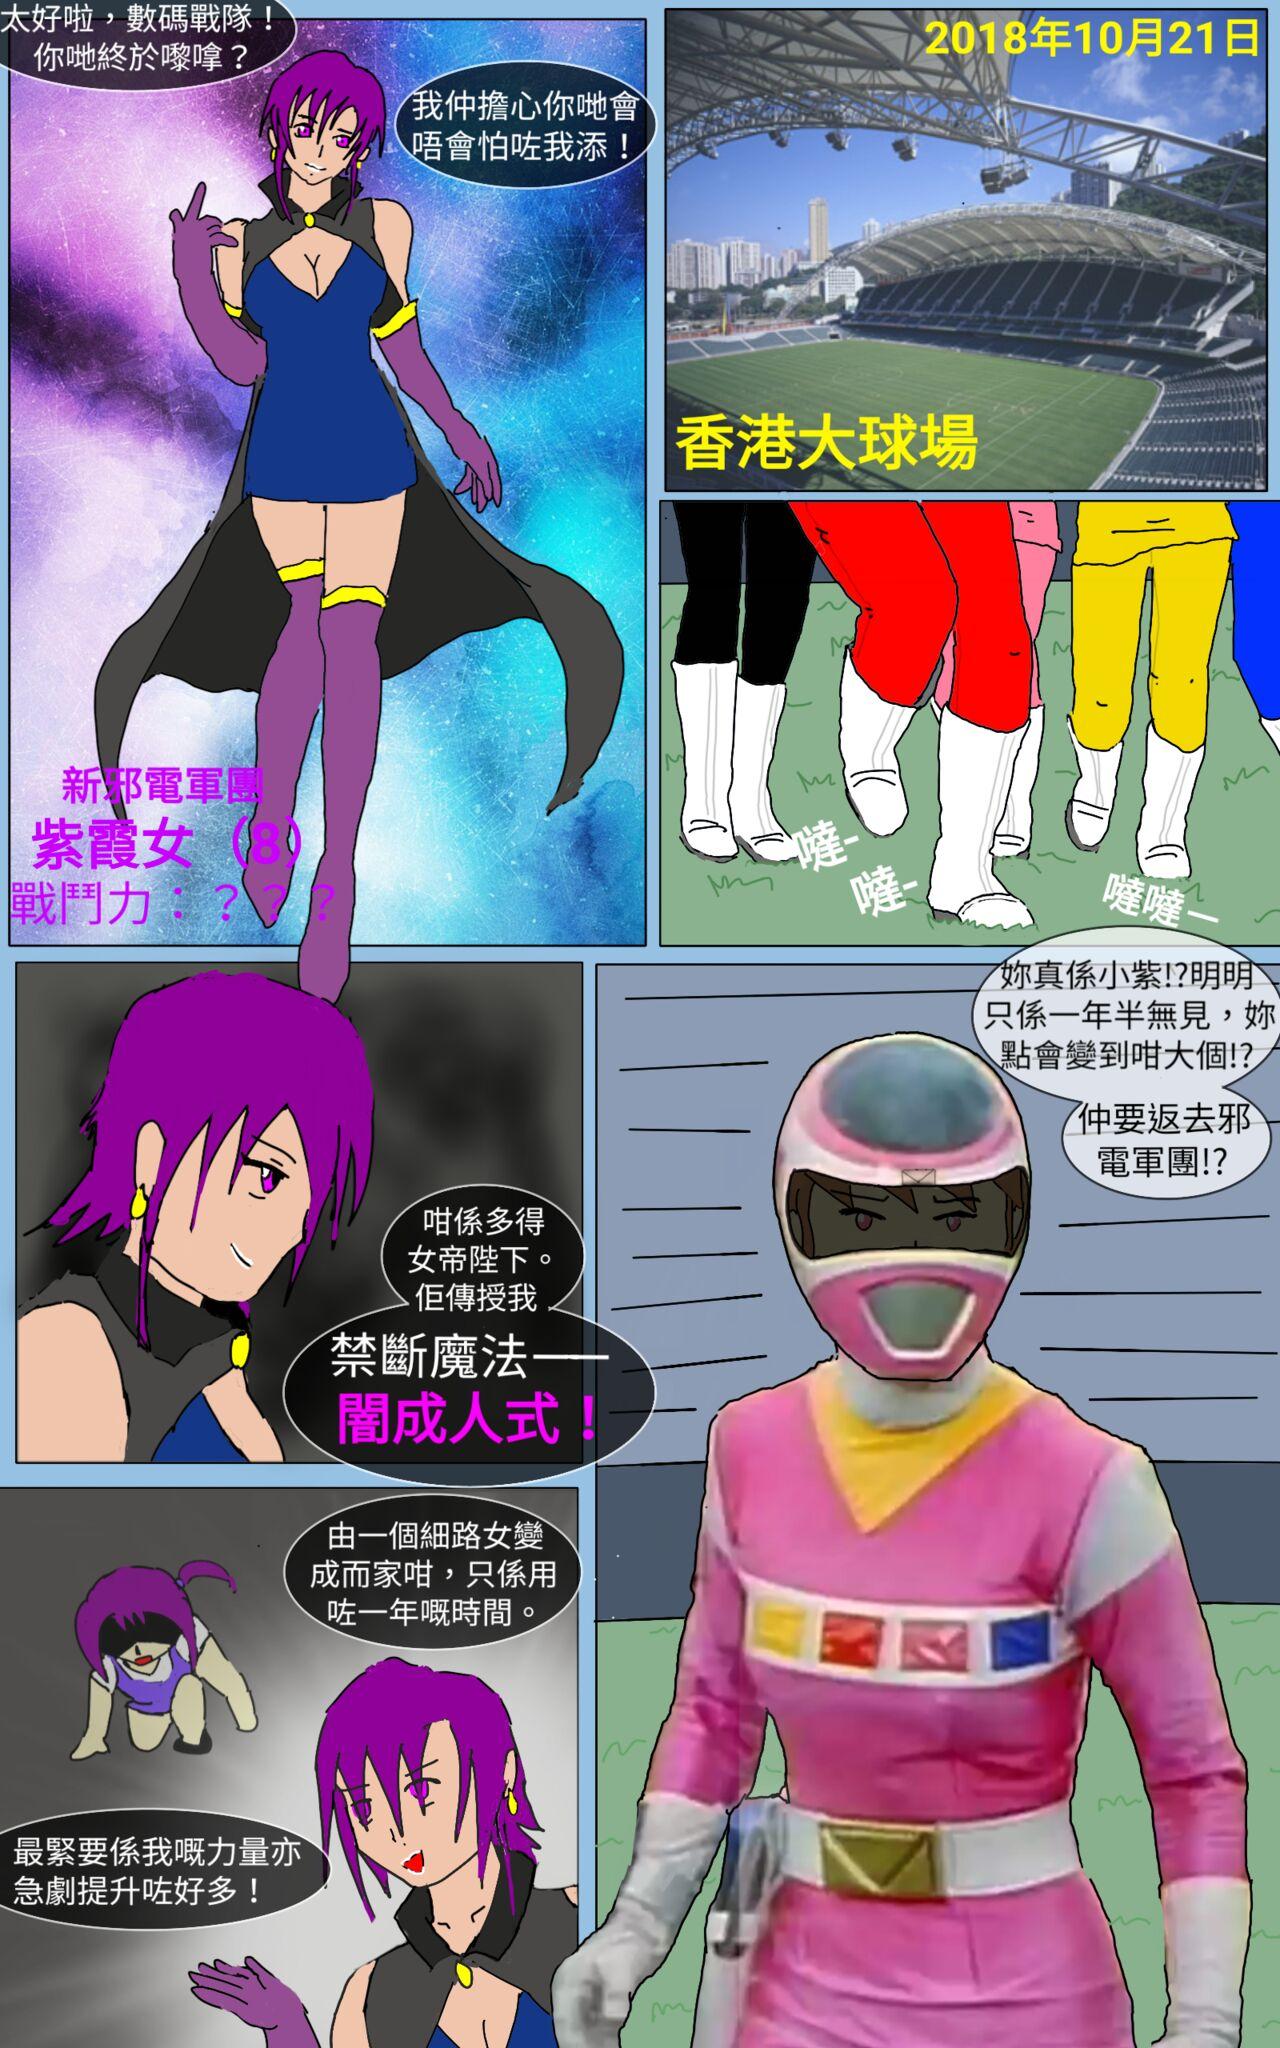 Girl Mission 13 - Super sentai Picked Up - Picture 1